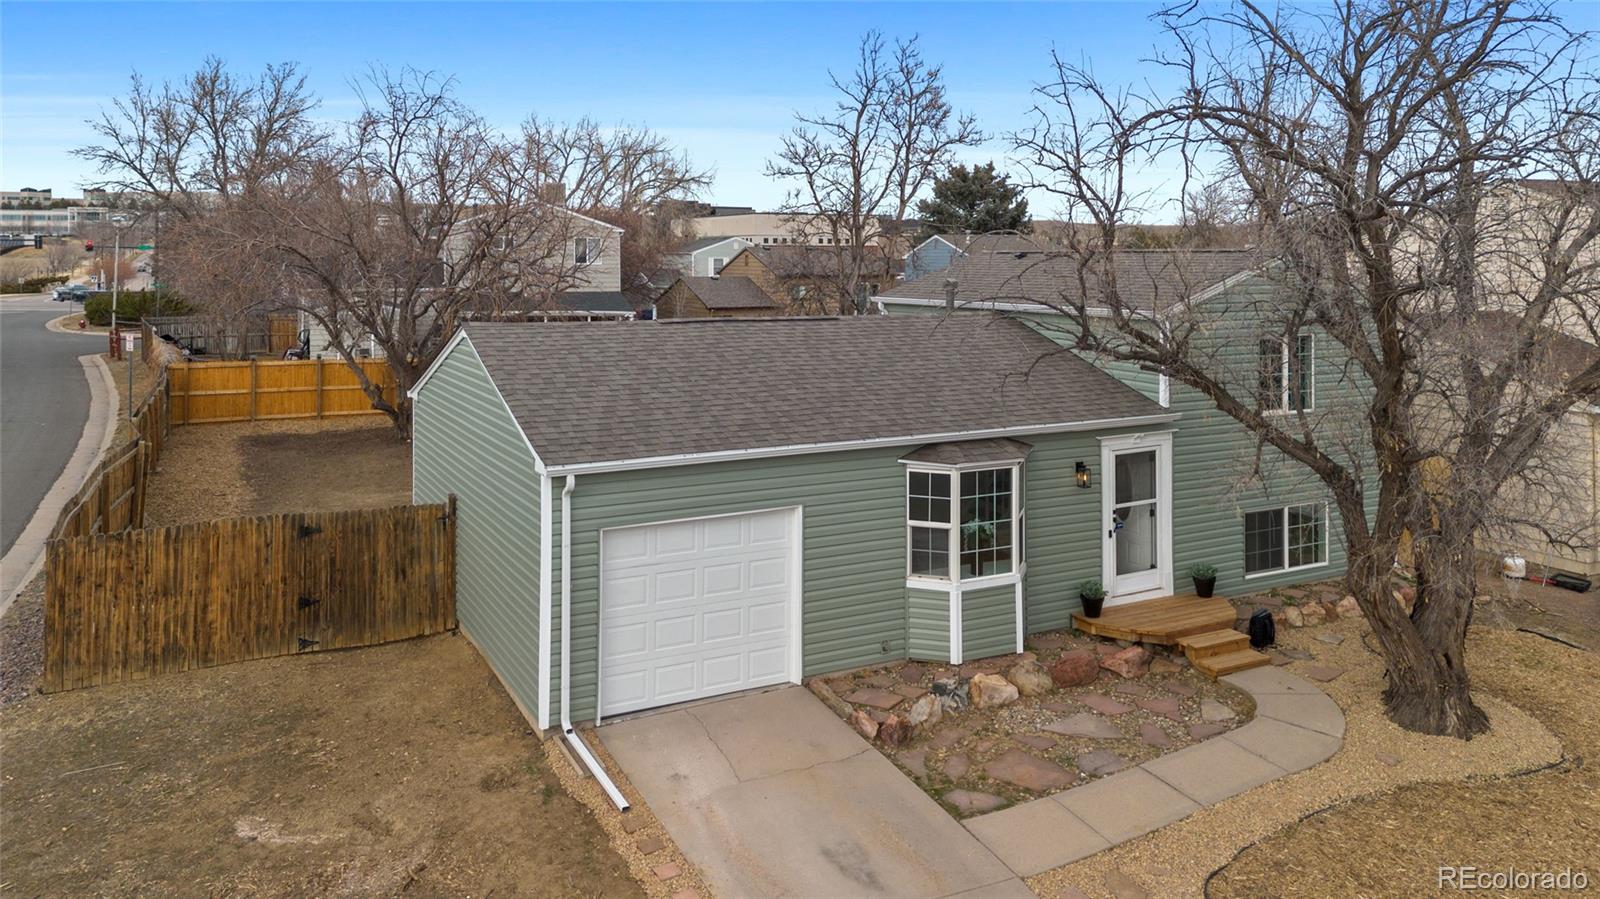 Report Image for 10301 W 107th Circle,Westminster, Colorado